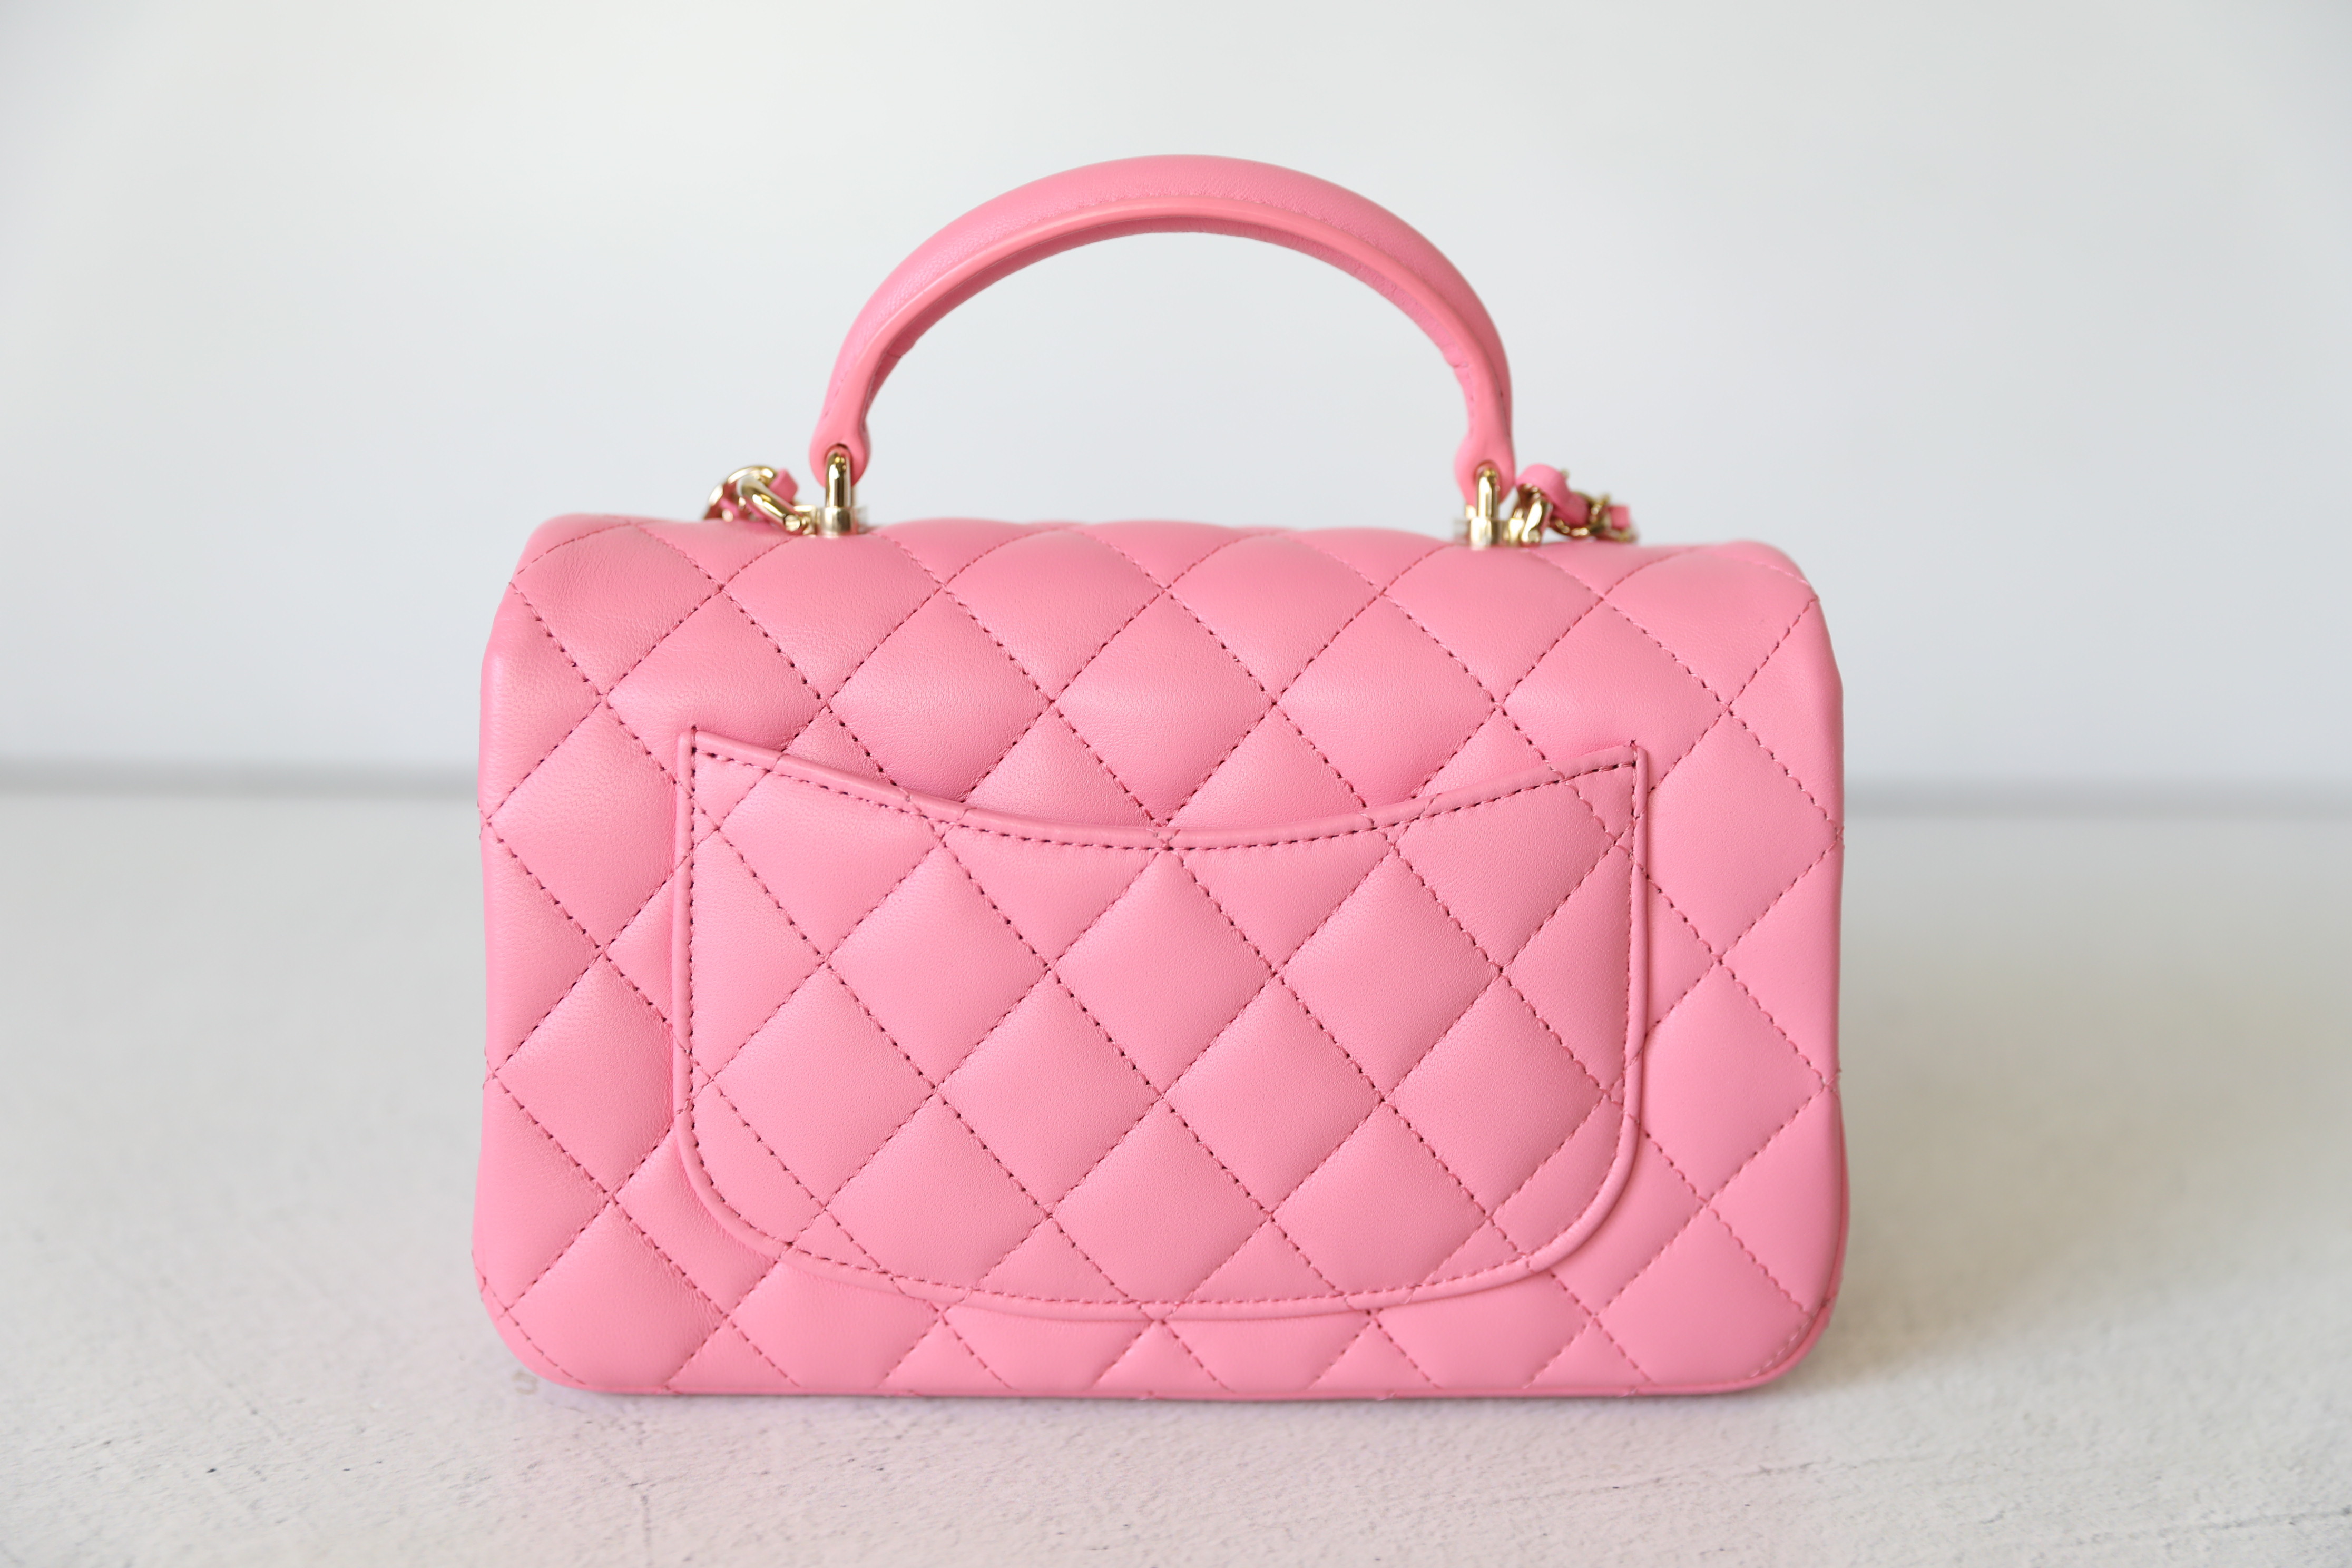 Chanel Classic Mini Rectangular Single Flap, Iridescent Pink Calfskin  Leather with Silver Hardware, Preowned in Box WA001